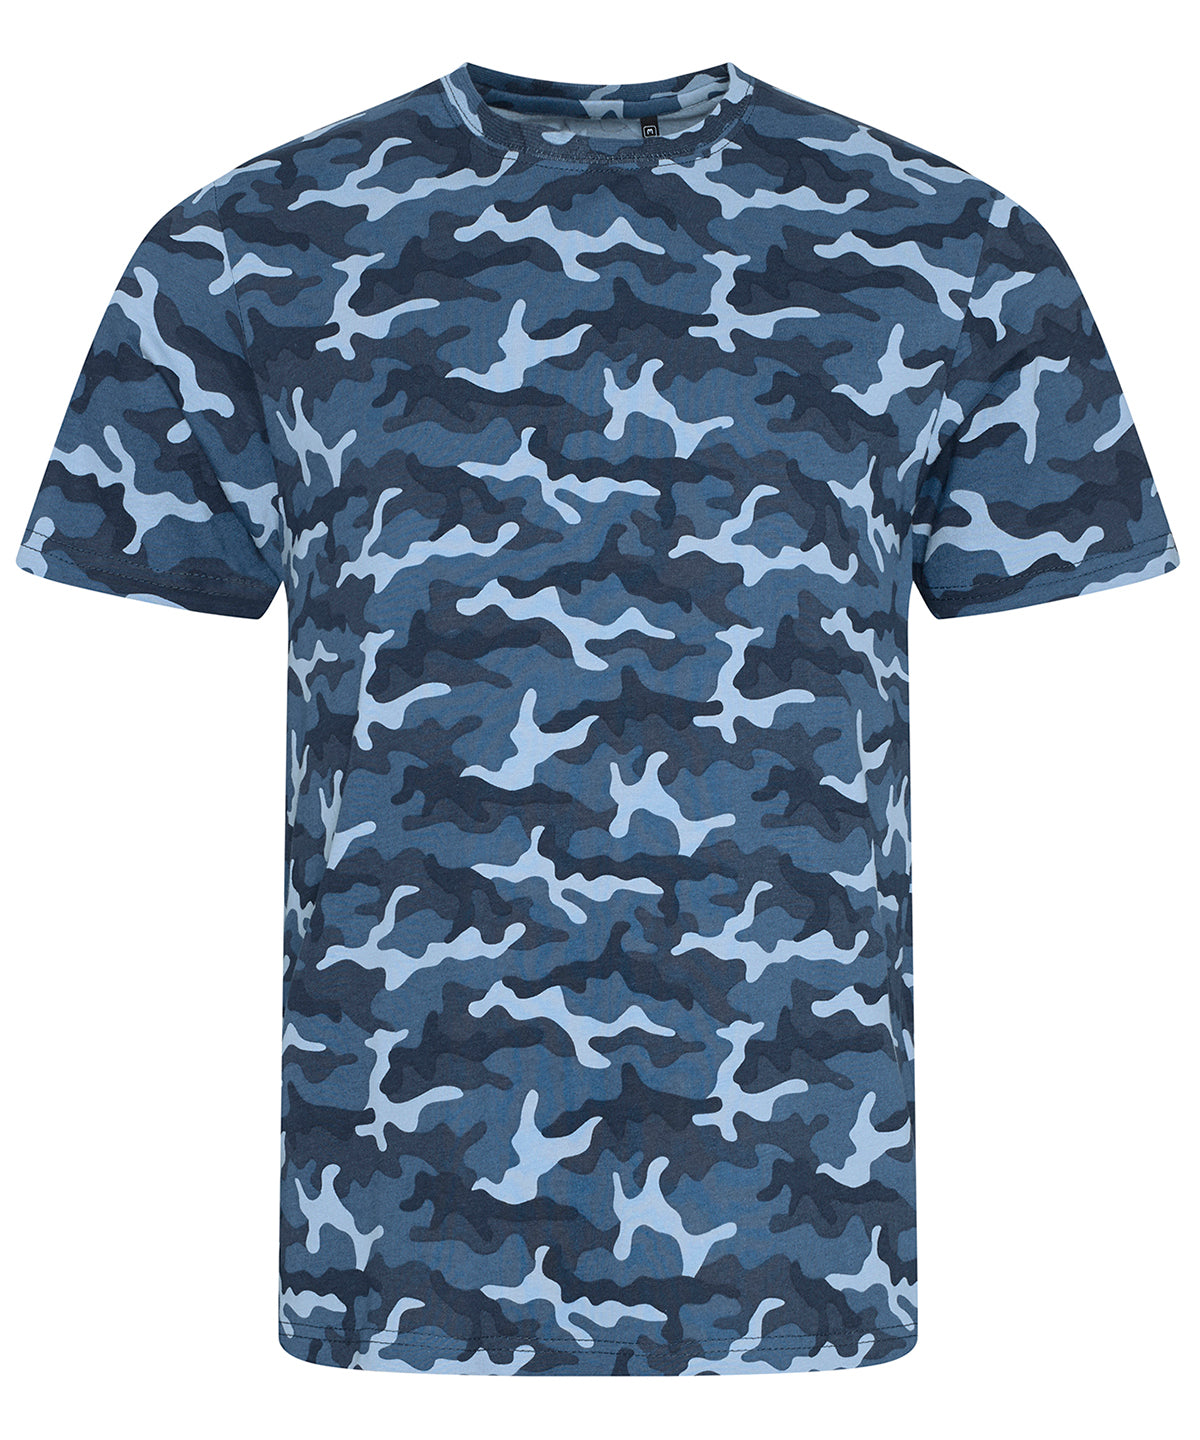 Personalised T-Shirts - Camouflage AWDis Just T's Camo T